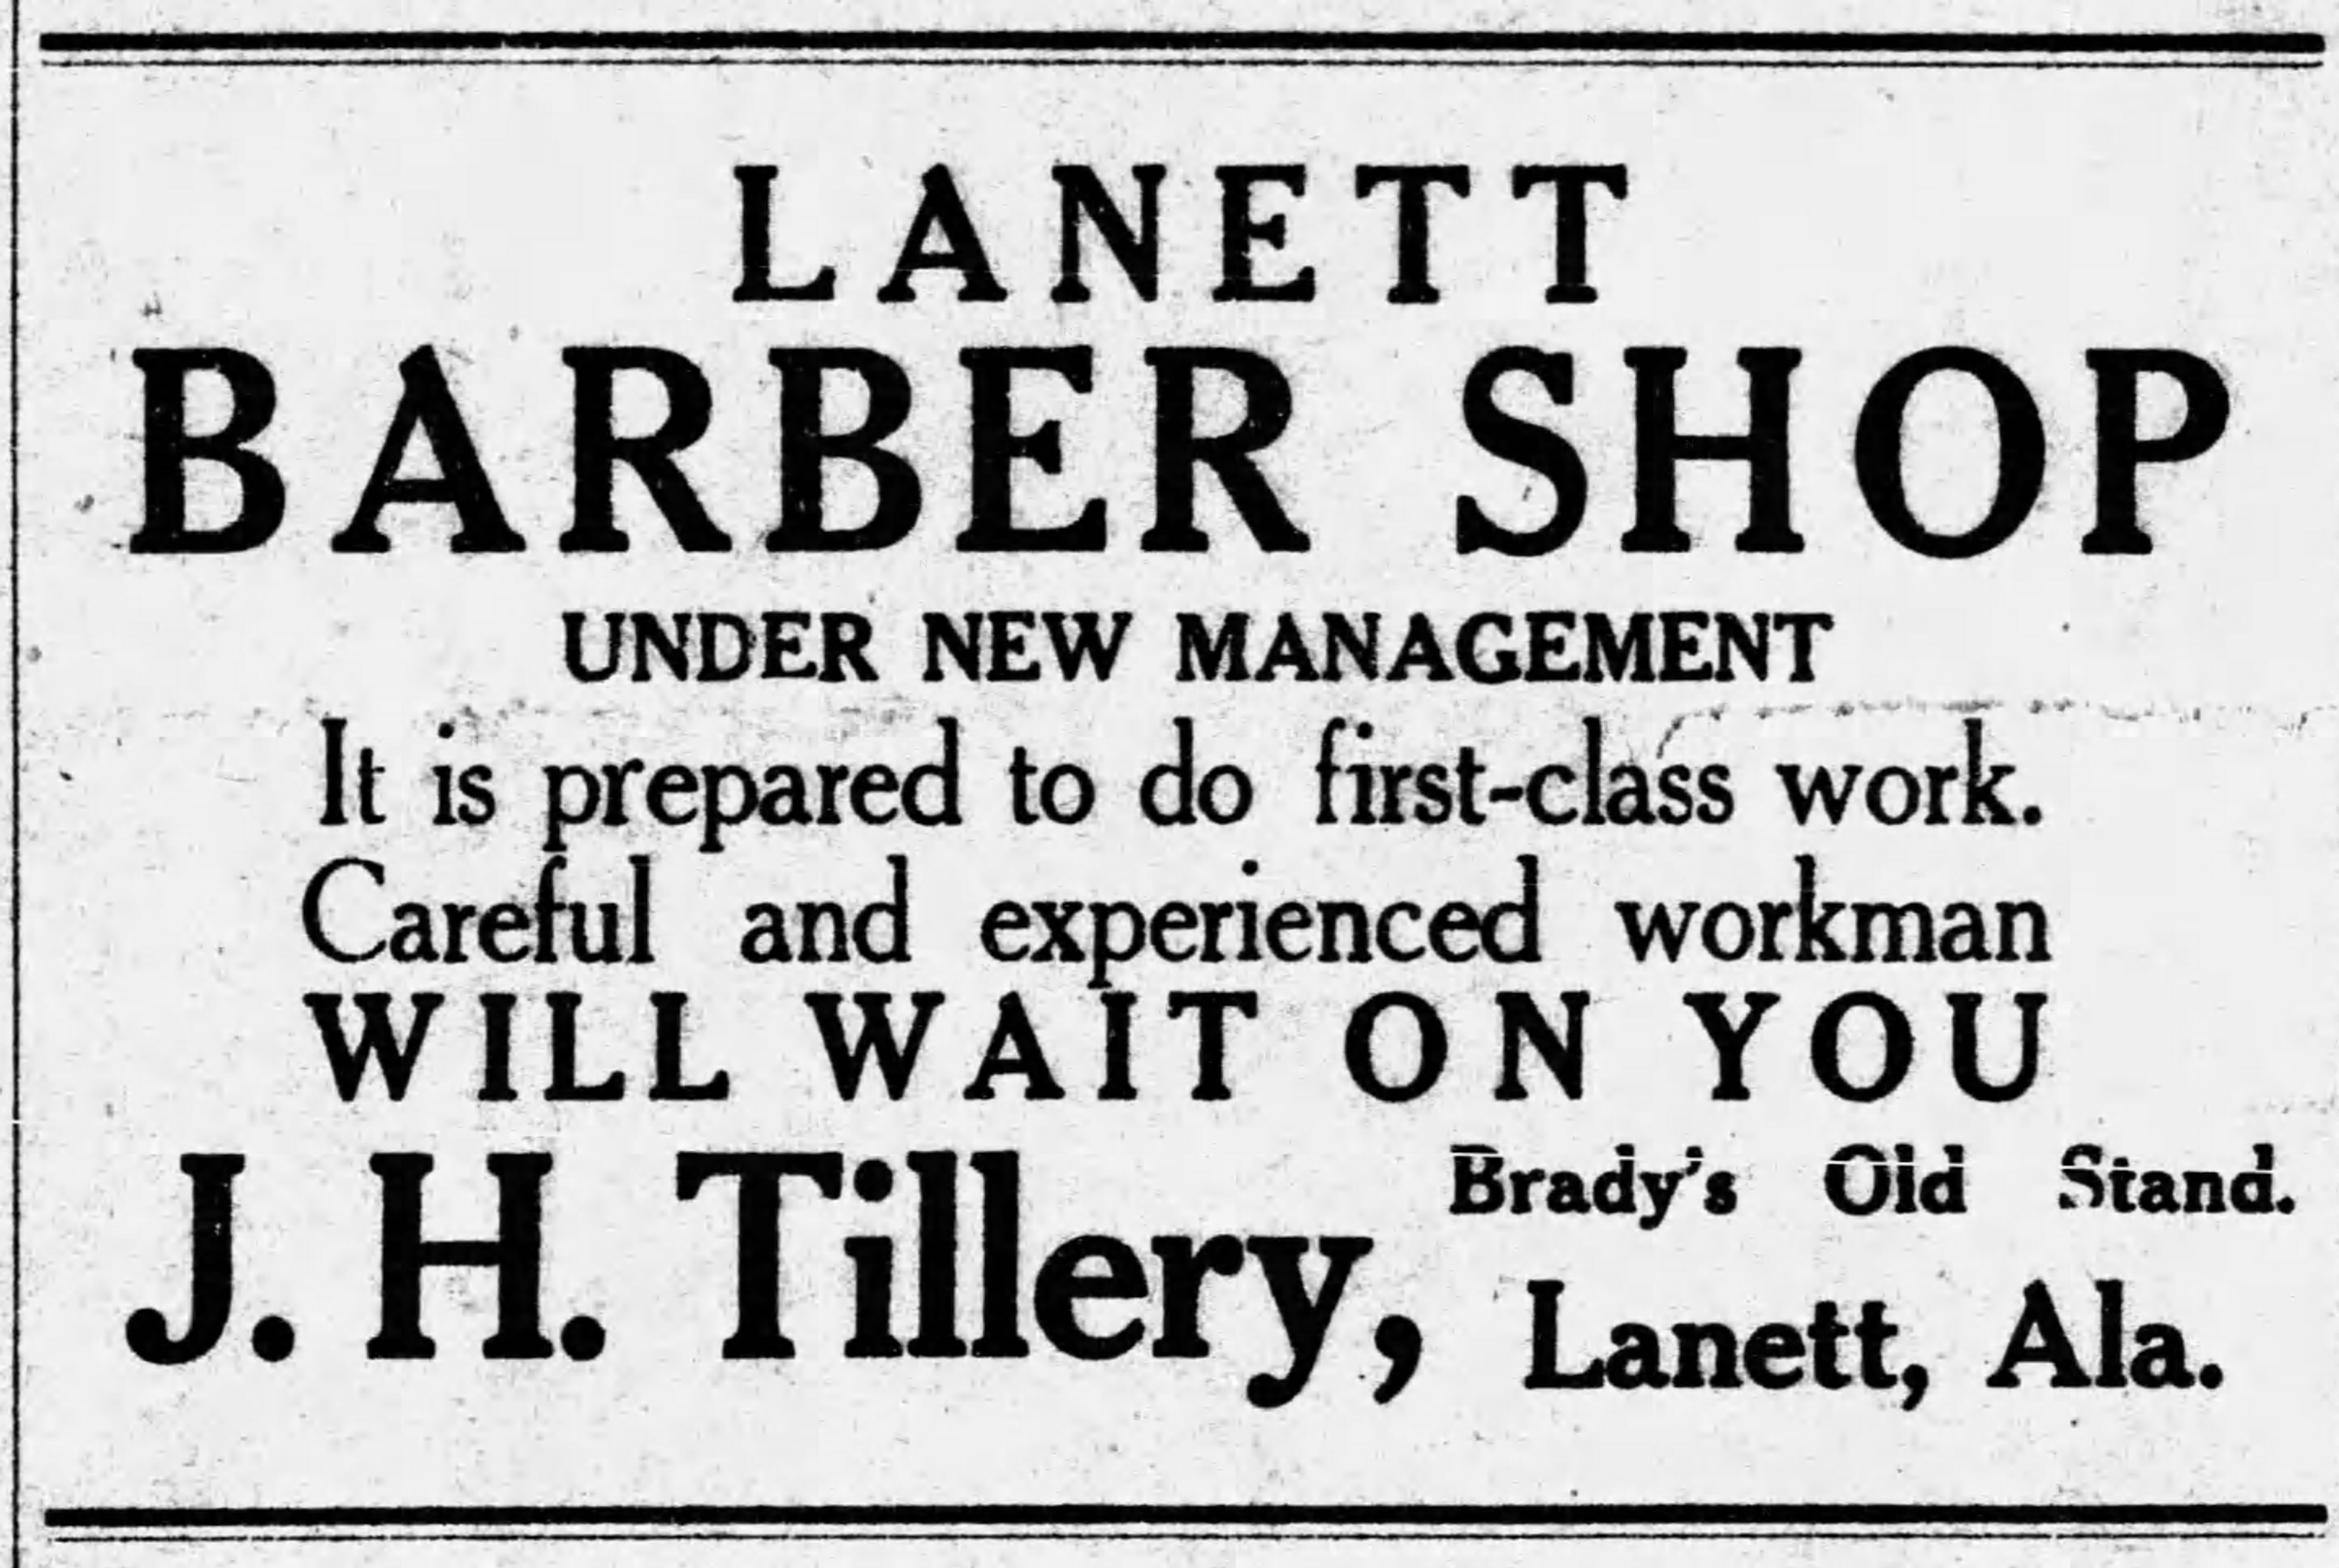 PATRON – Local and Personal News from Lanett, Alabama on February 17, 1916